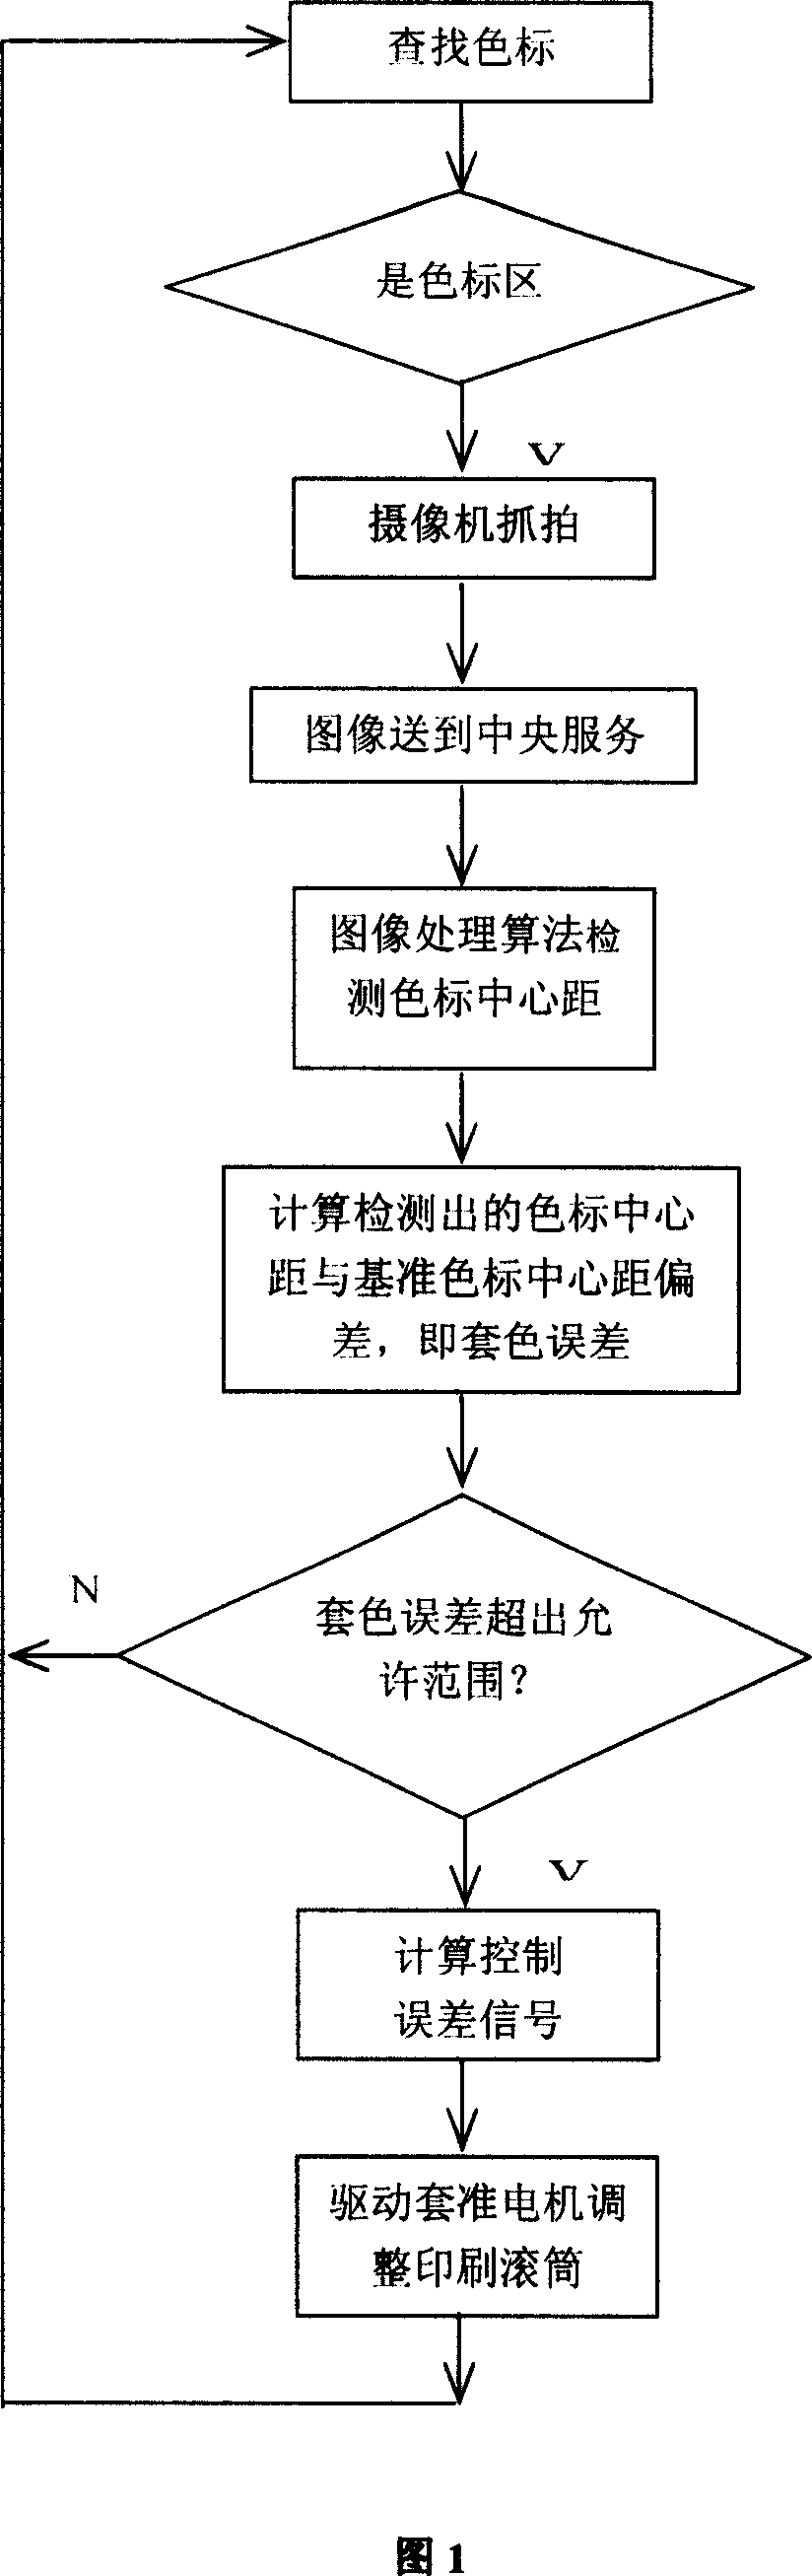 Method of using camera to carry out controlling automatic alignment for printing machine